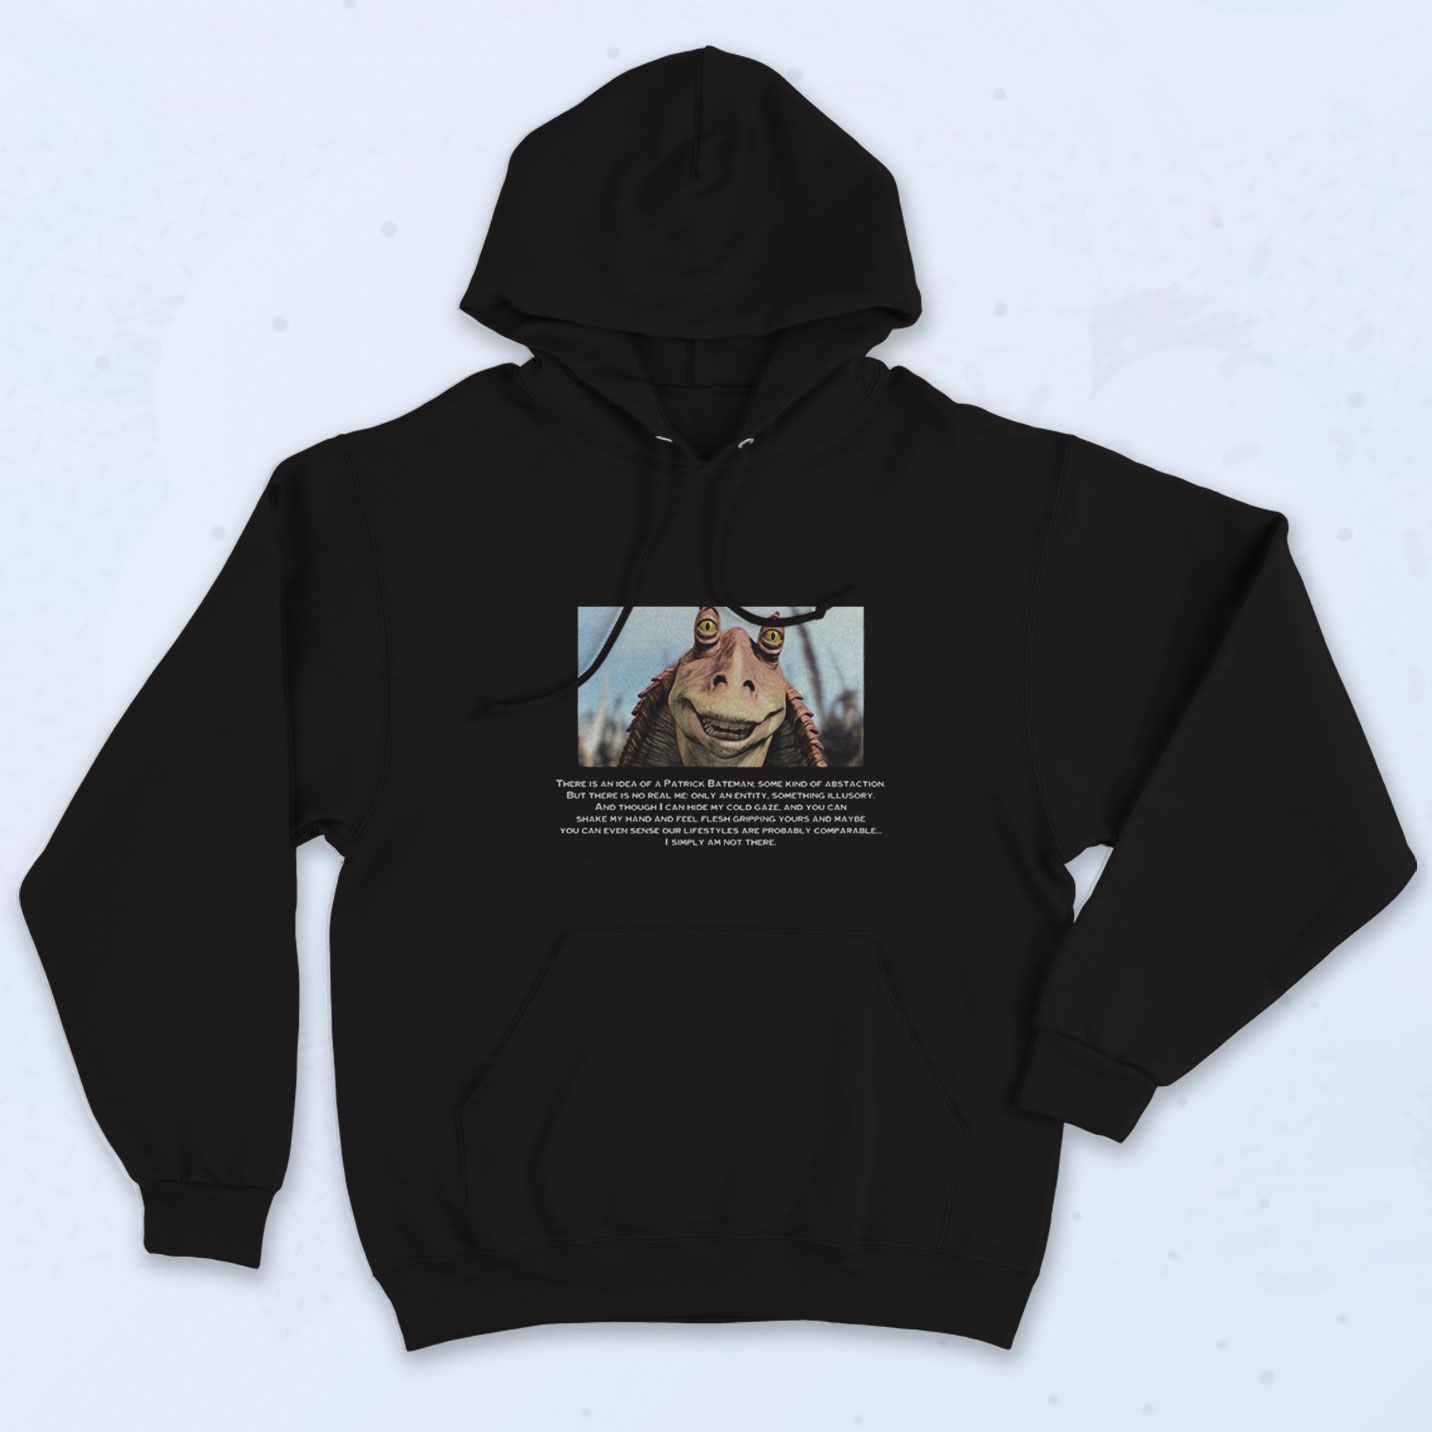 There Is An Idea Of A Patrick Bateman Hoodie - 90sclothes.com